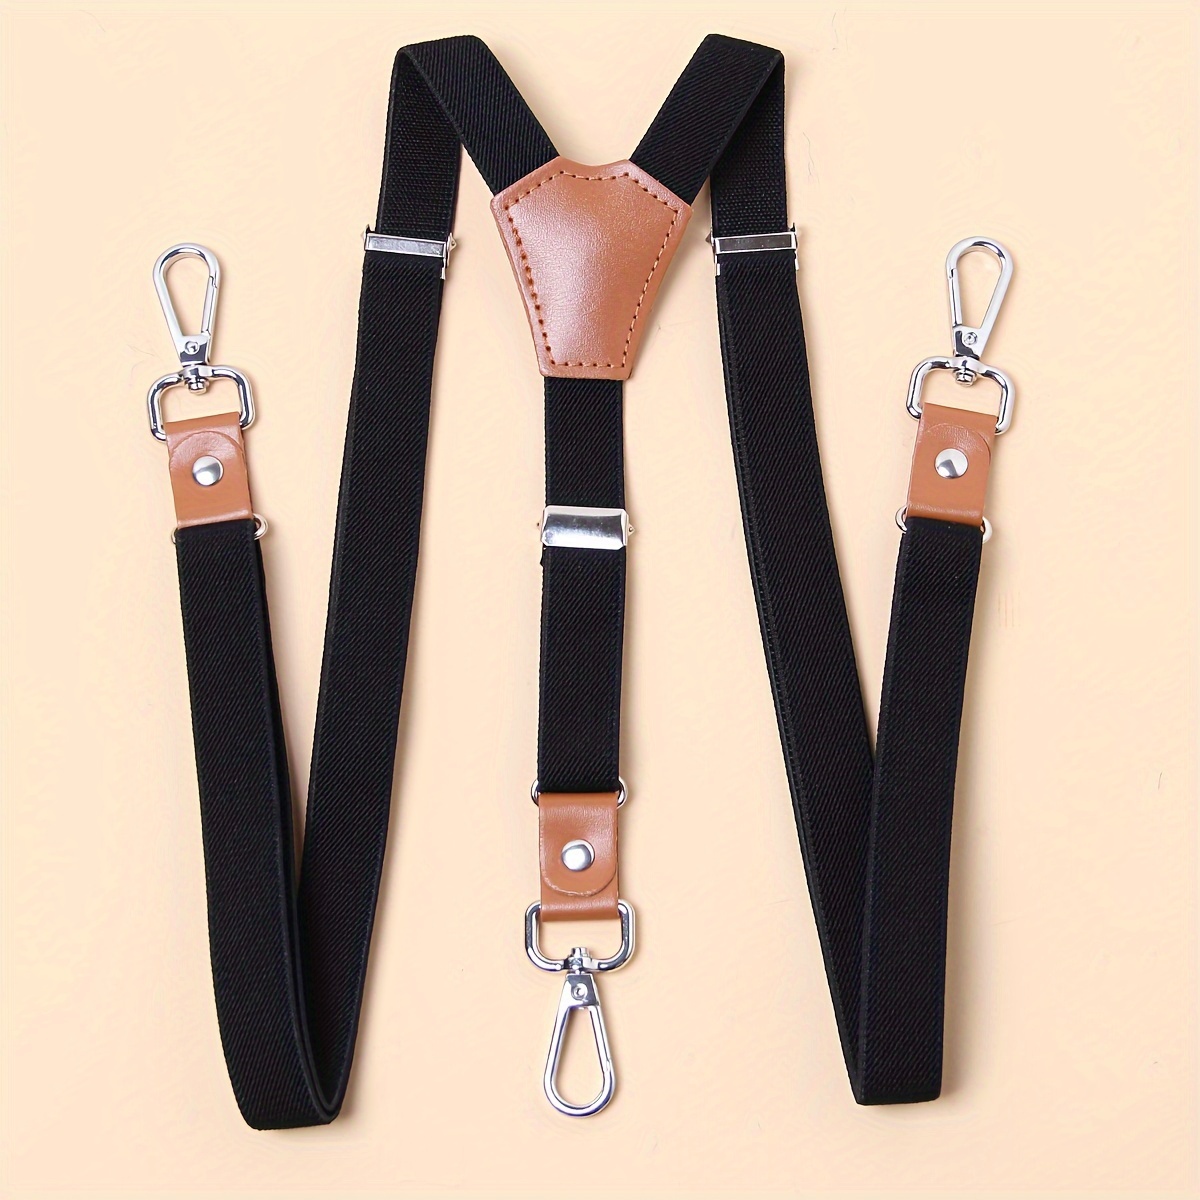 

1pc Fashionable Suspenders, Simple And Useful, Comfortable Design, Adjustable Length, For Clothing Daily Wear Sport Outdoor